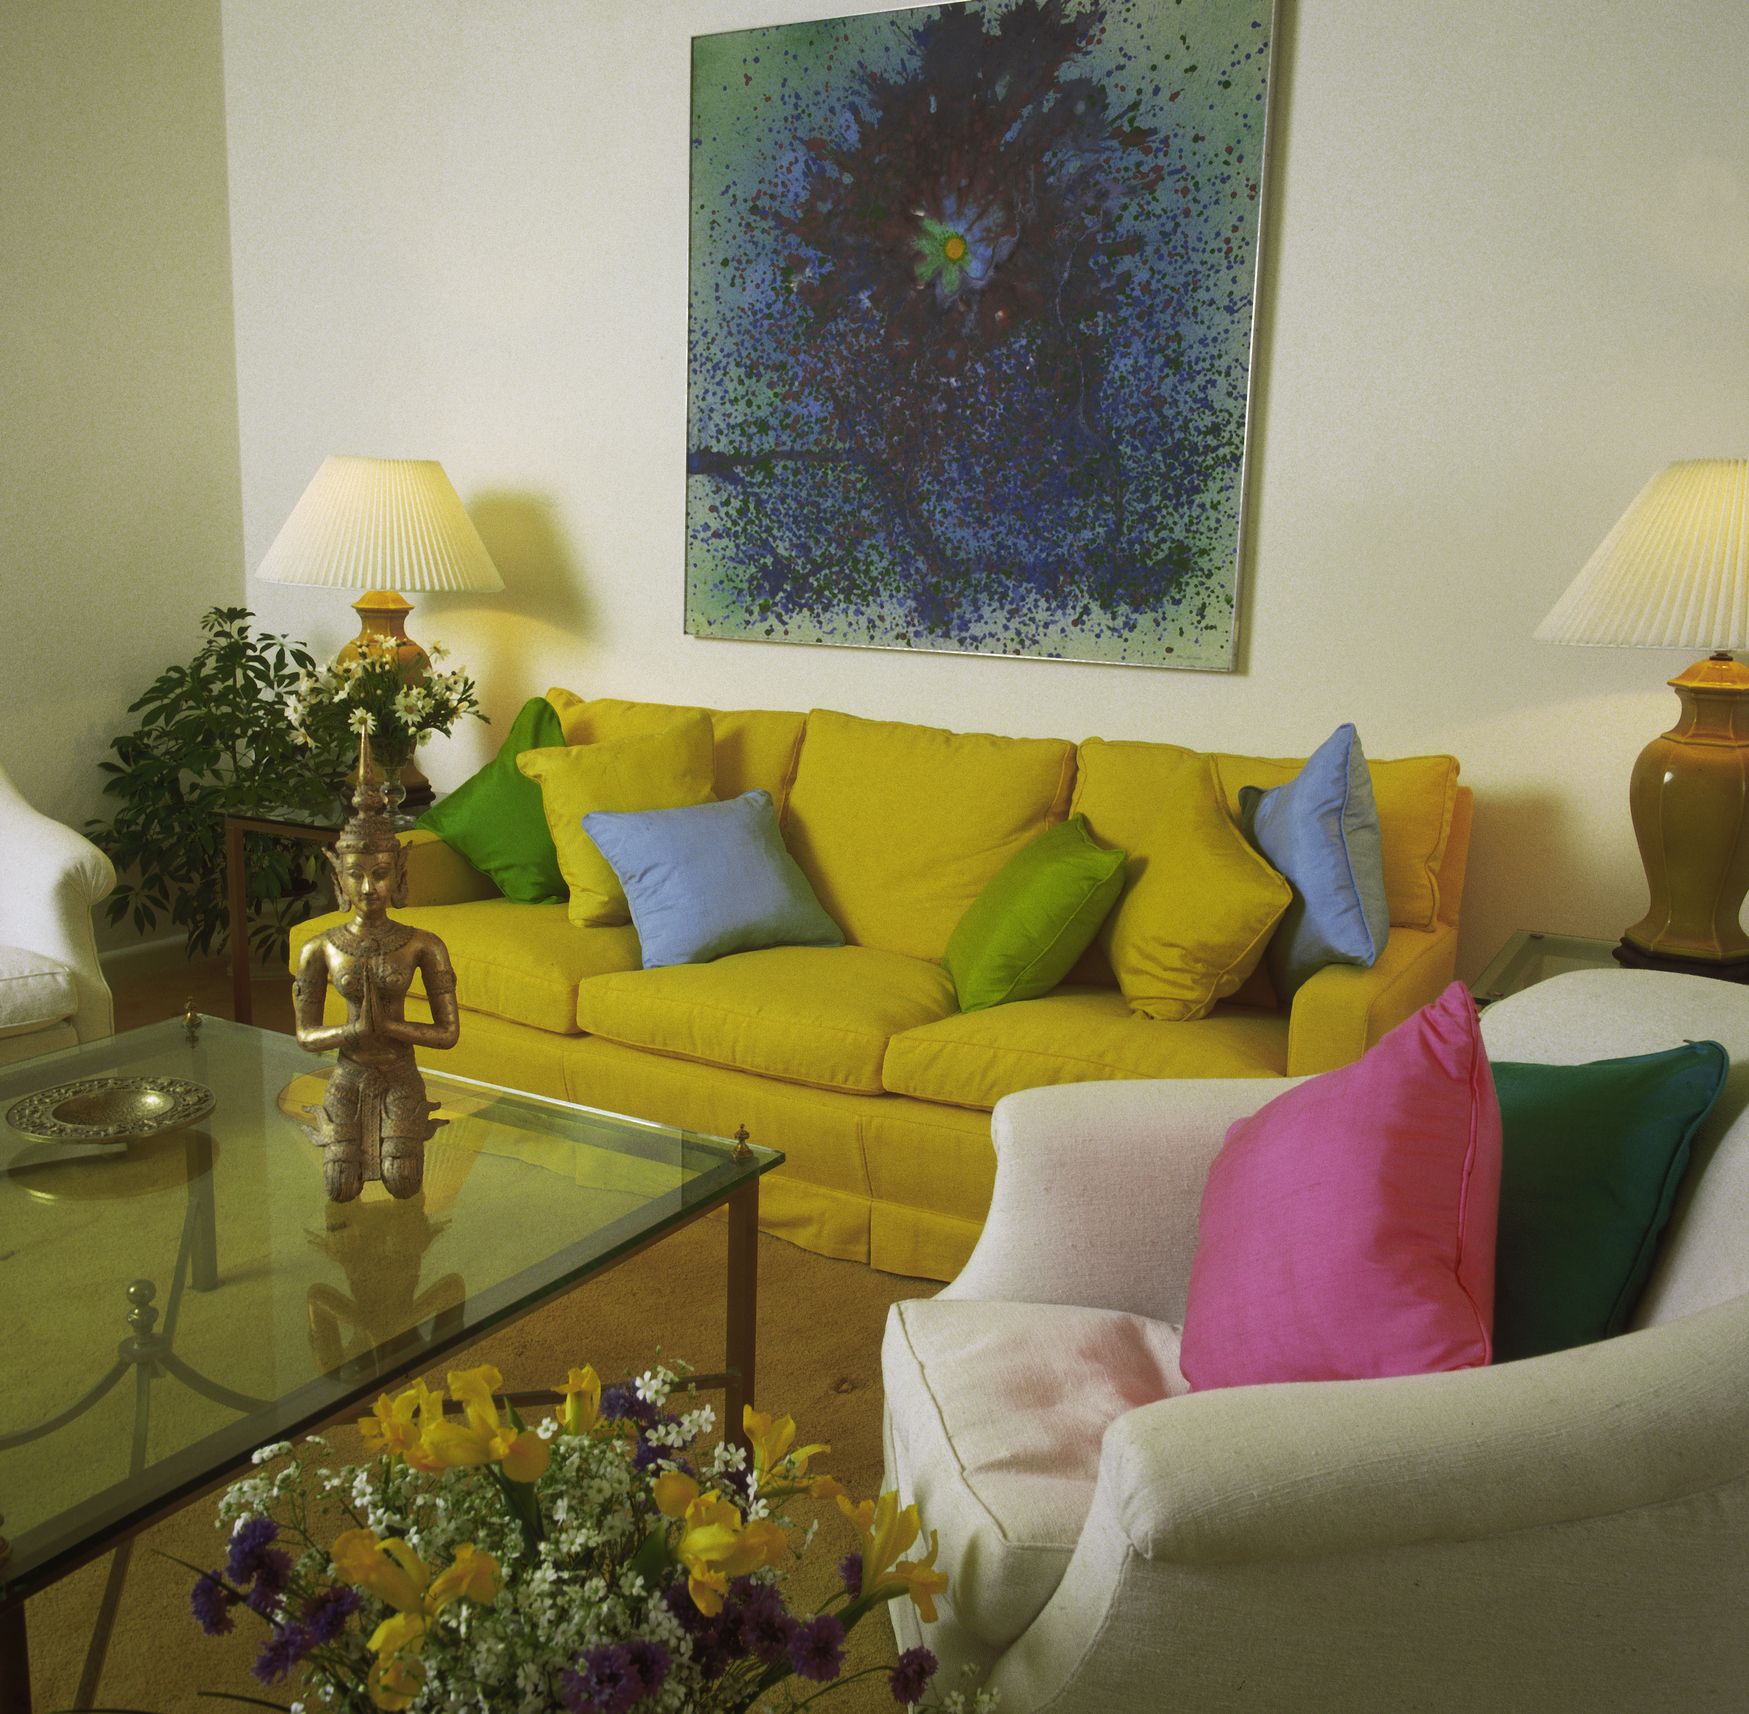 12 Decor Trends From The 1990S That You Didn'T Know You Missed